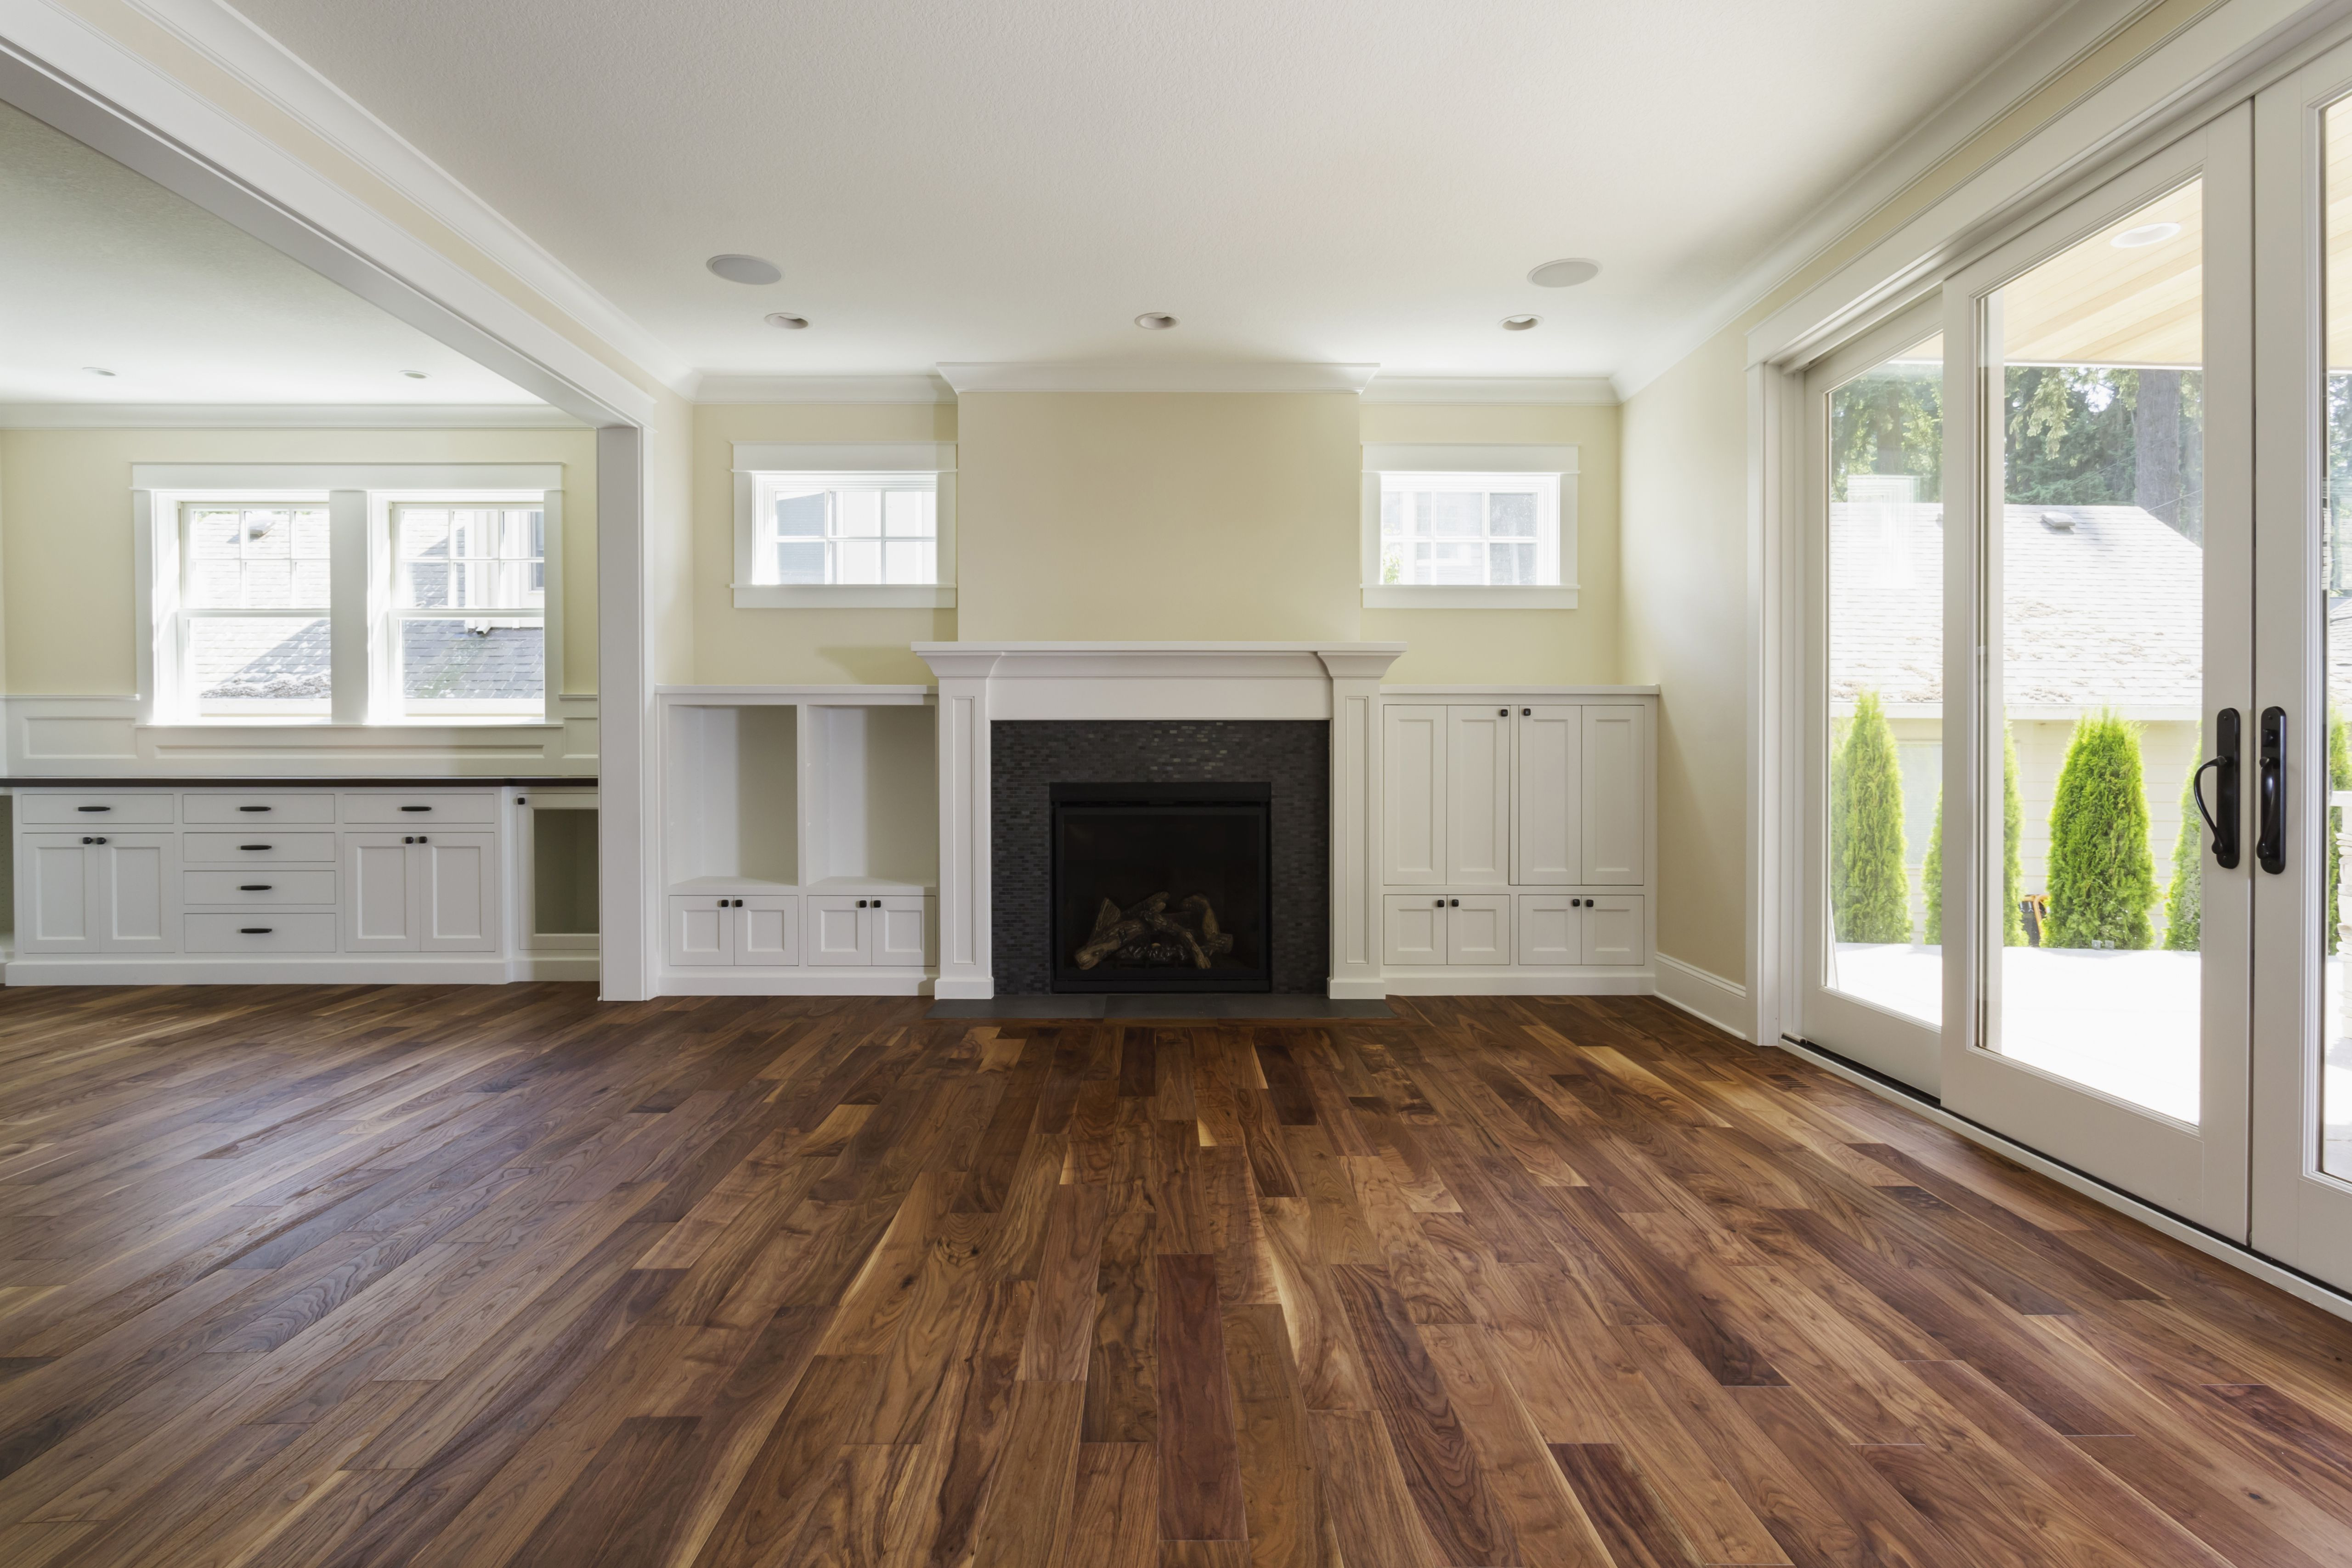 27 Famous Laminate Wood Flooring Vs Hardwood Cost 2024 free download laminate wood flooring vs hardwood cost of the pros and cons of prefinished hardwood flooring with regard to fireplace and built in shelves in living room 482143011 57bef8e33df78cc16e035397